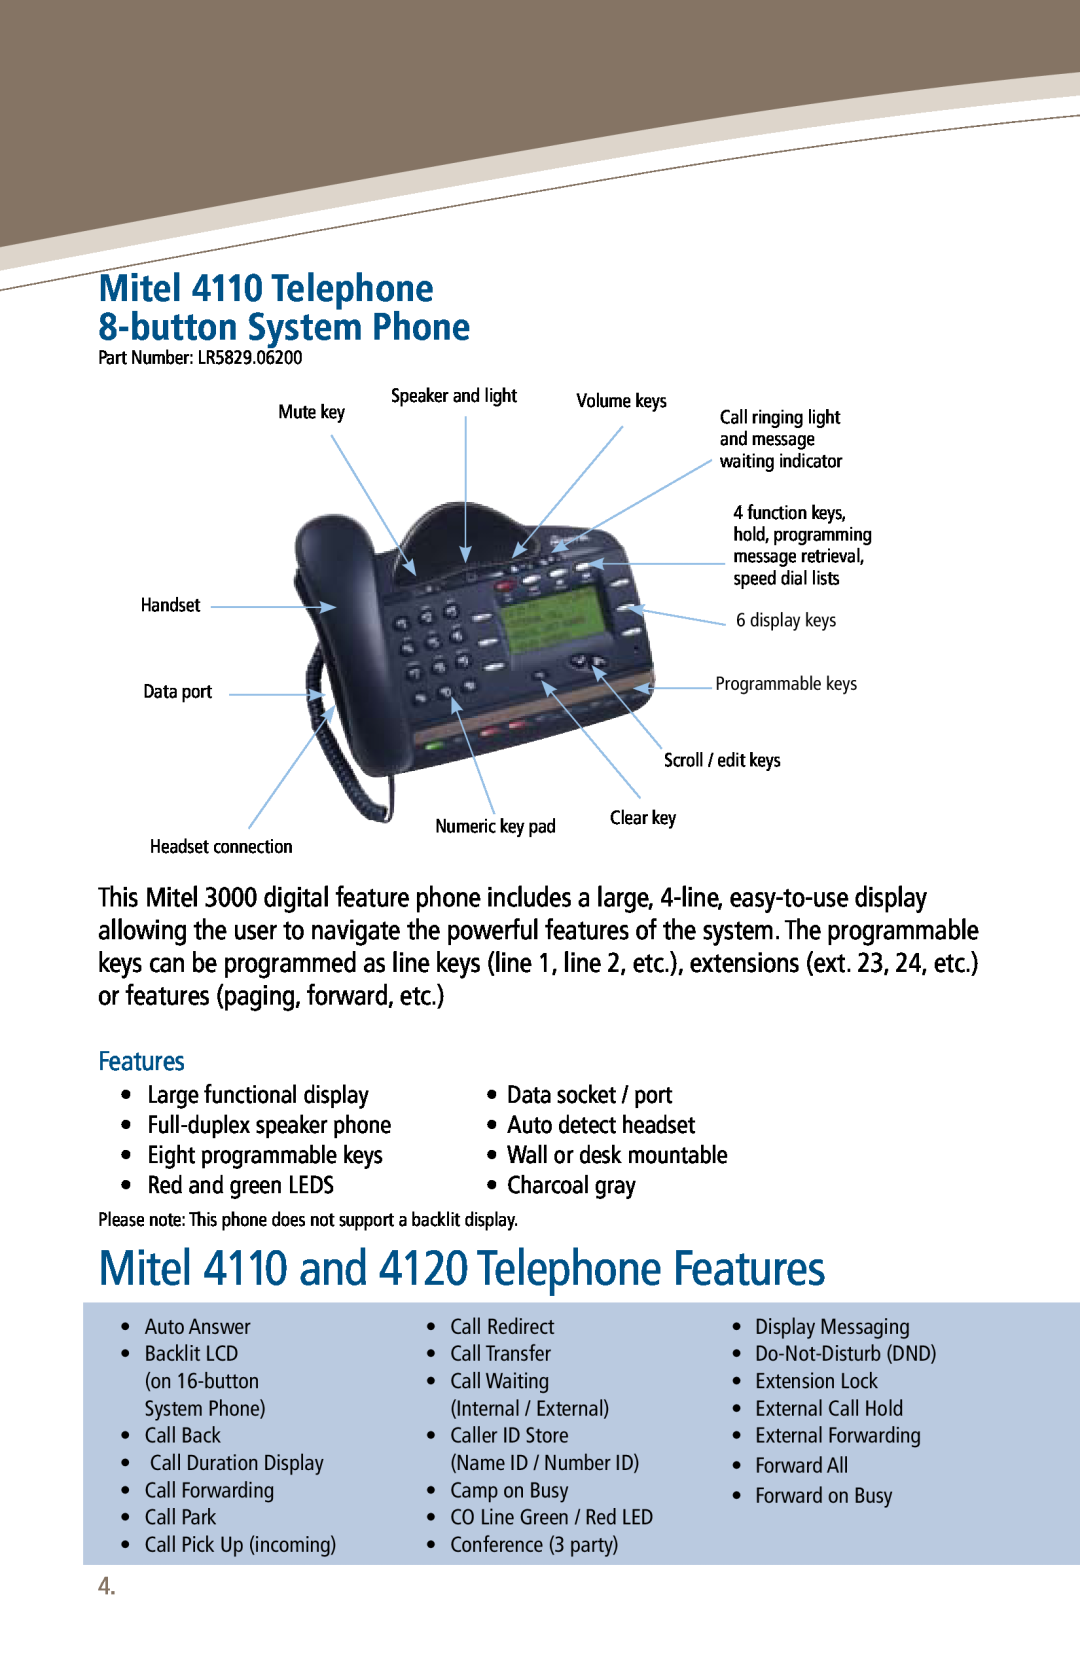 Mitel 3000 manual Mitel 4110 and 4120 Telephone Features, Mitel 4110 Telephone 8-button System Phone, Phones and Features 